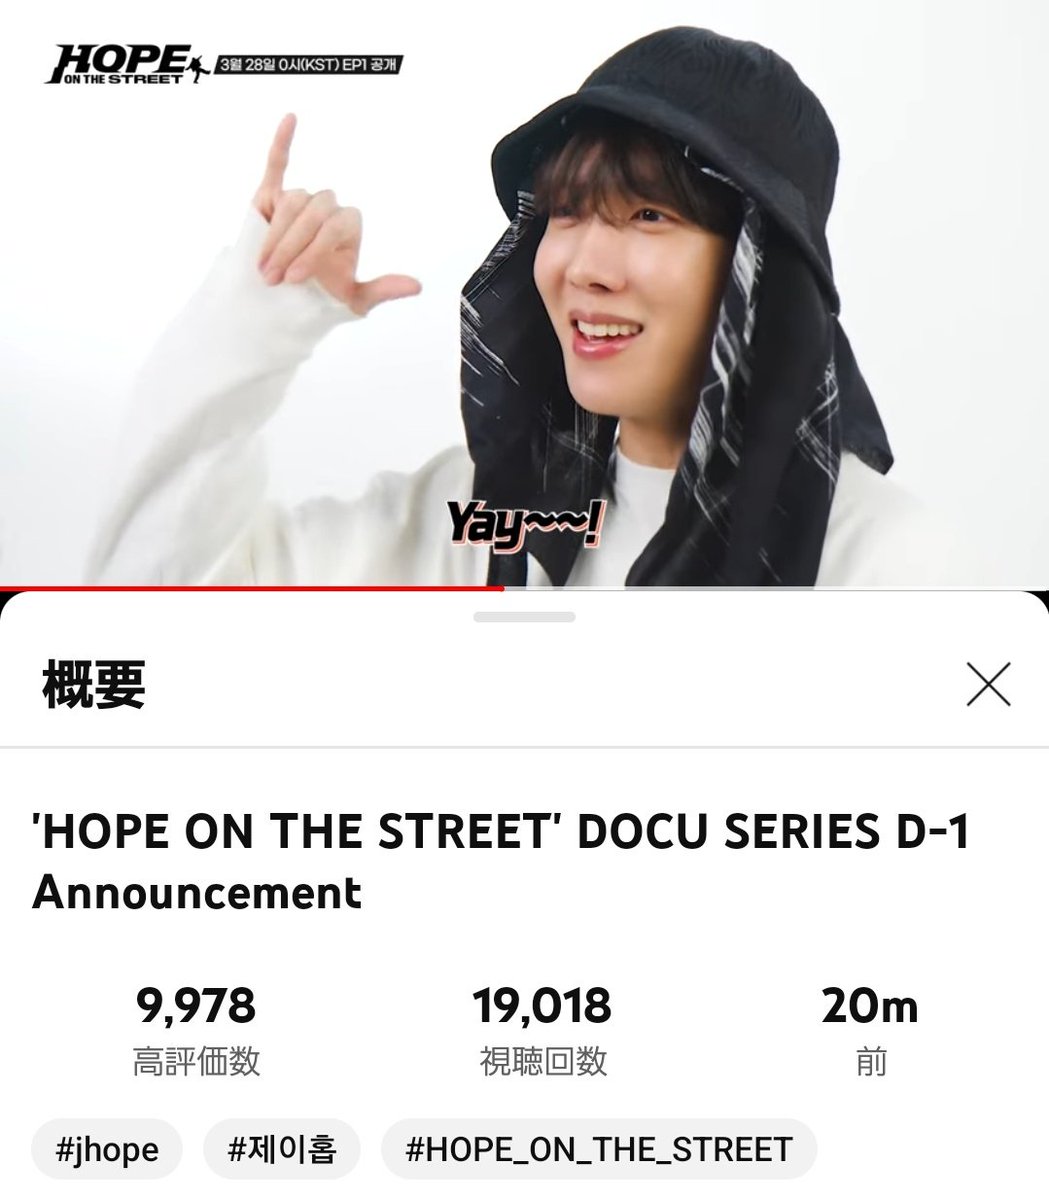 #D345/D-204

lets get to 100M🎁❣️

#JHOPE_ON_THE_STREET 
#JhopexJcole
#HOPE_ON_THE_STREET #홉온스 #jhope #제이홉

We love #on_the_street by #jhope of @BTS_twt ft. #JCole.*˚